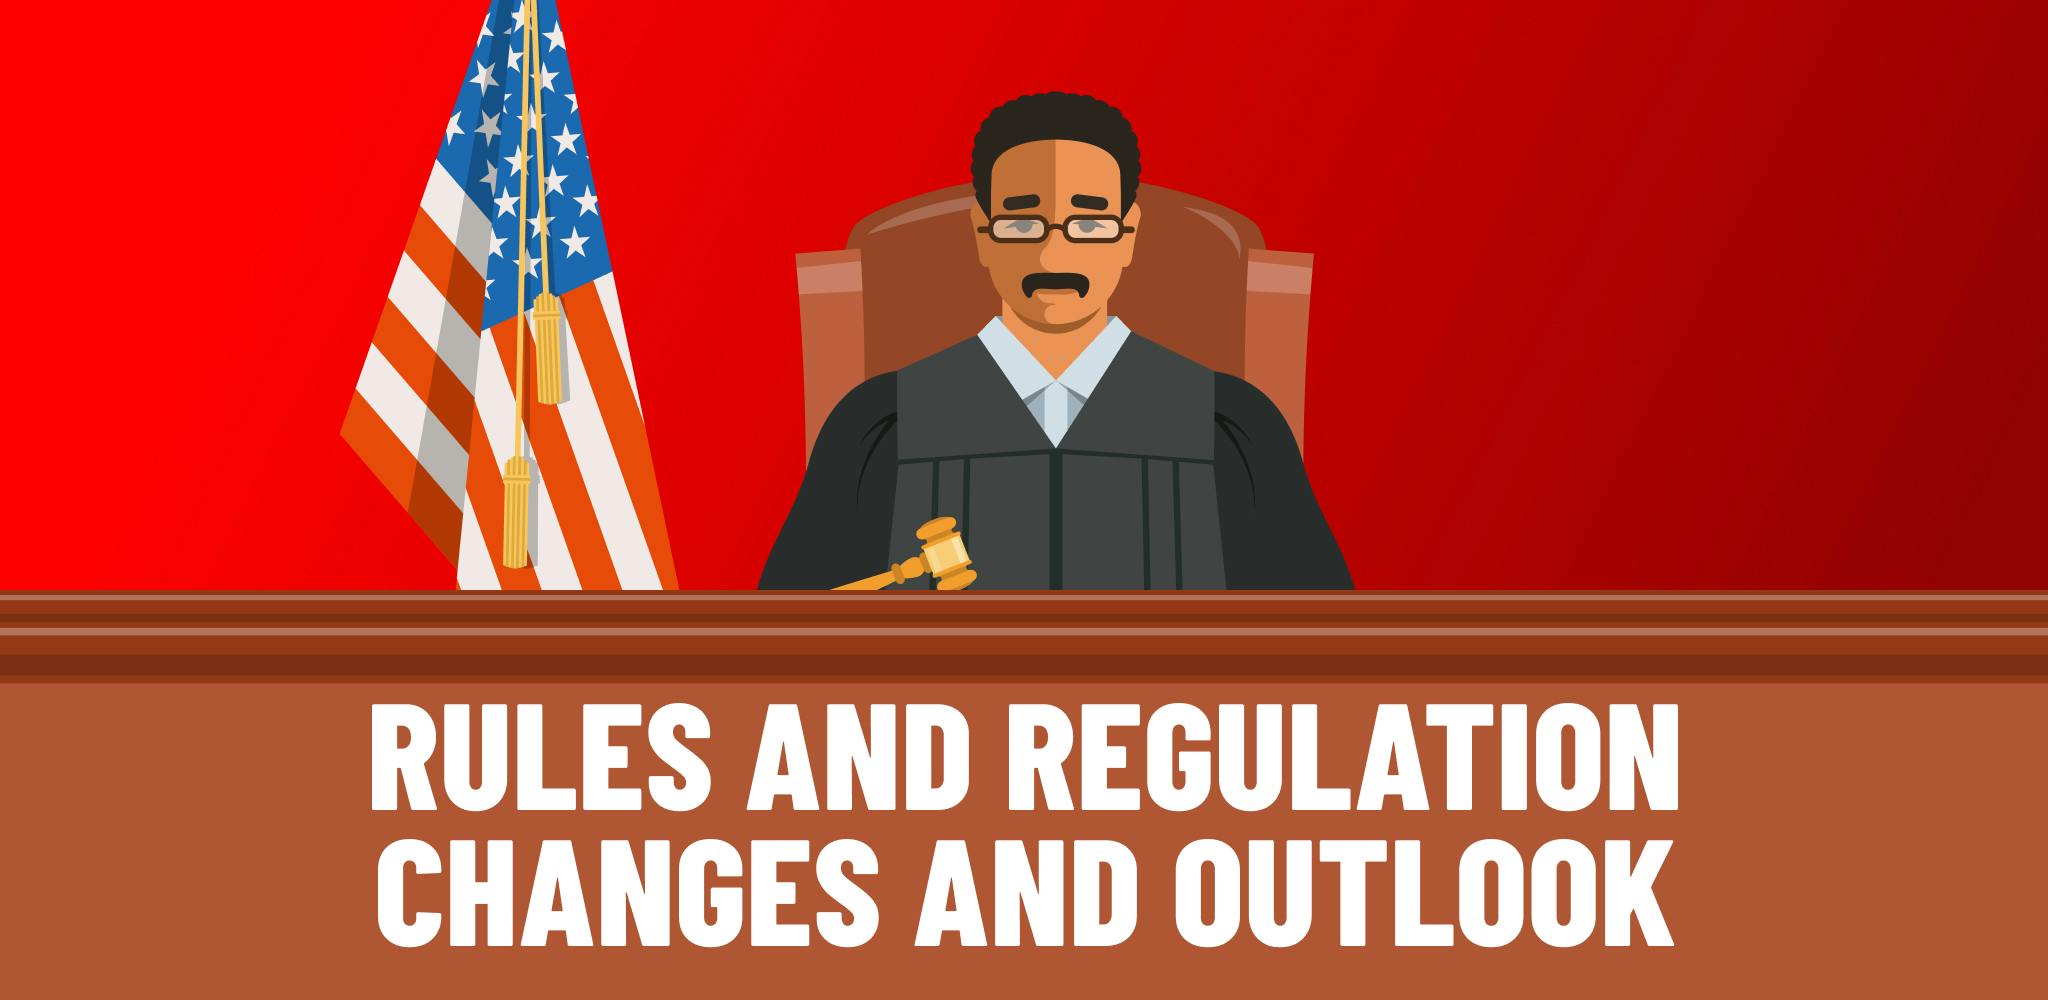 Rules and regulation changes and outlook. 